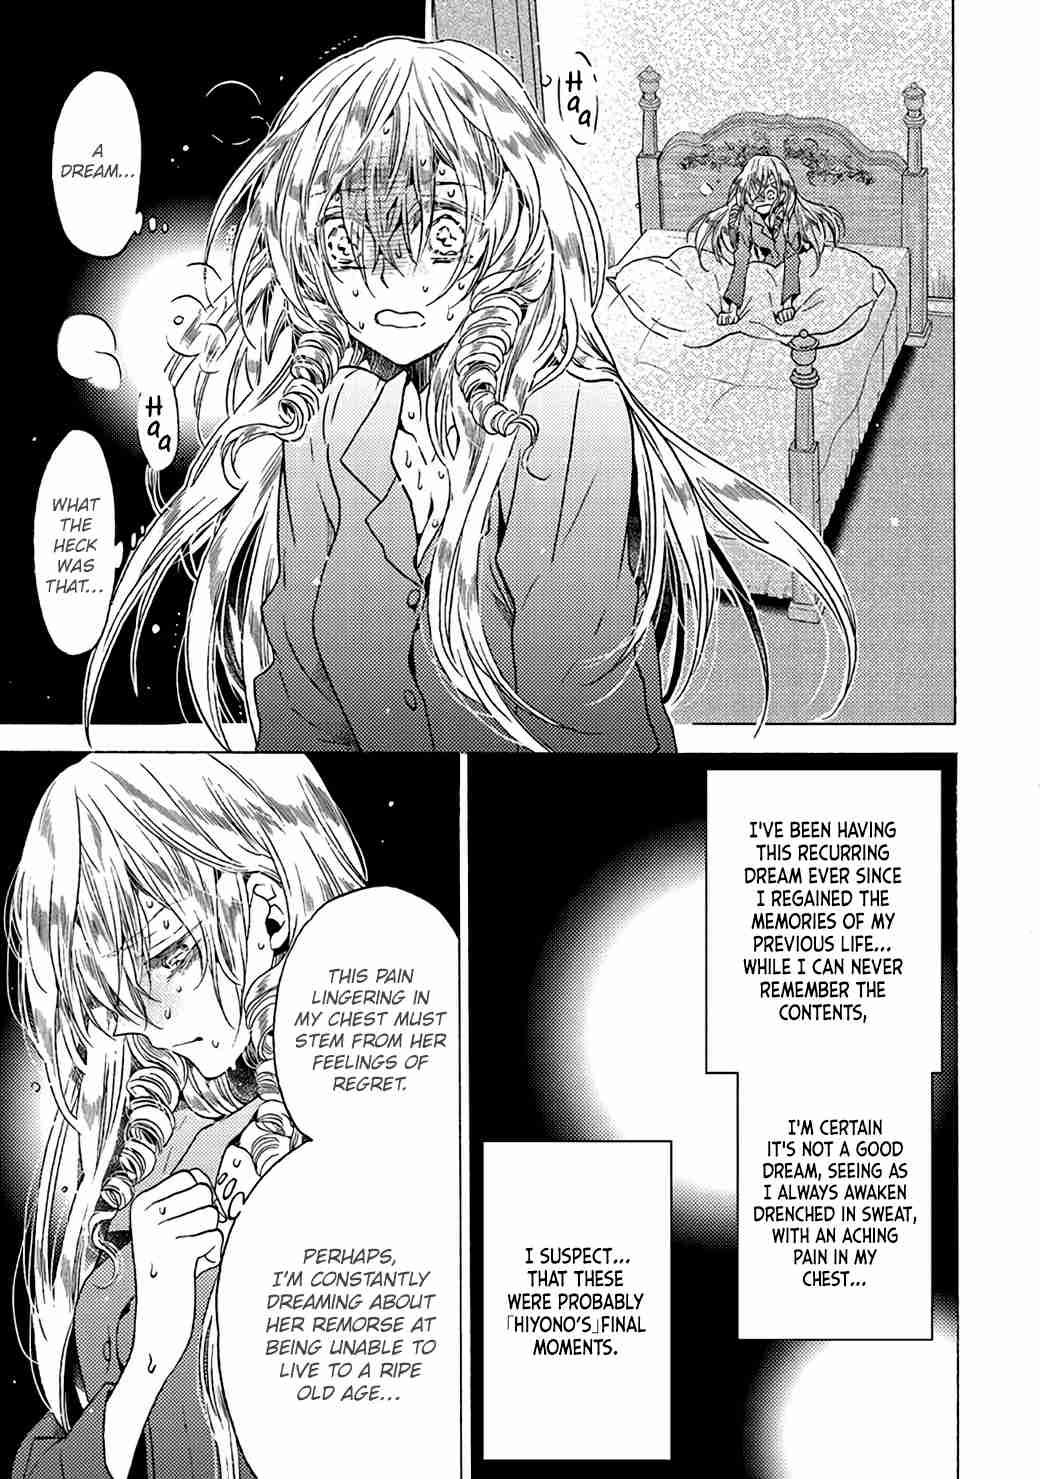 The Villainess, Cecilia Silvie, Doesn't Want to Die, so She Decided to Crossdress! Ch. 3.3